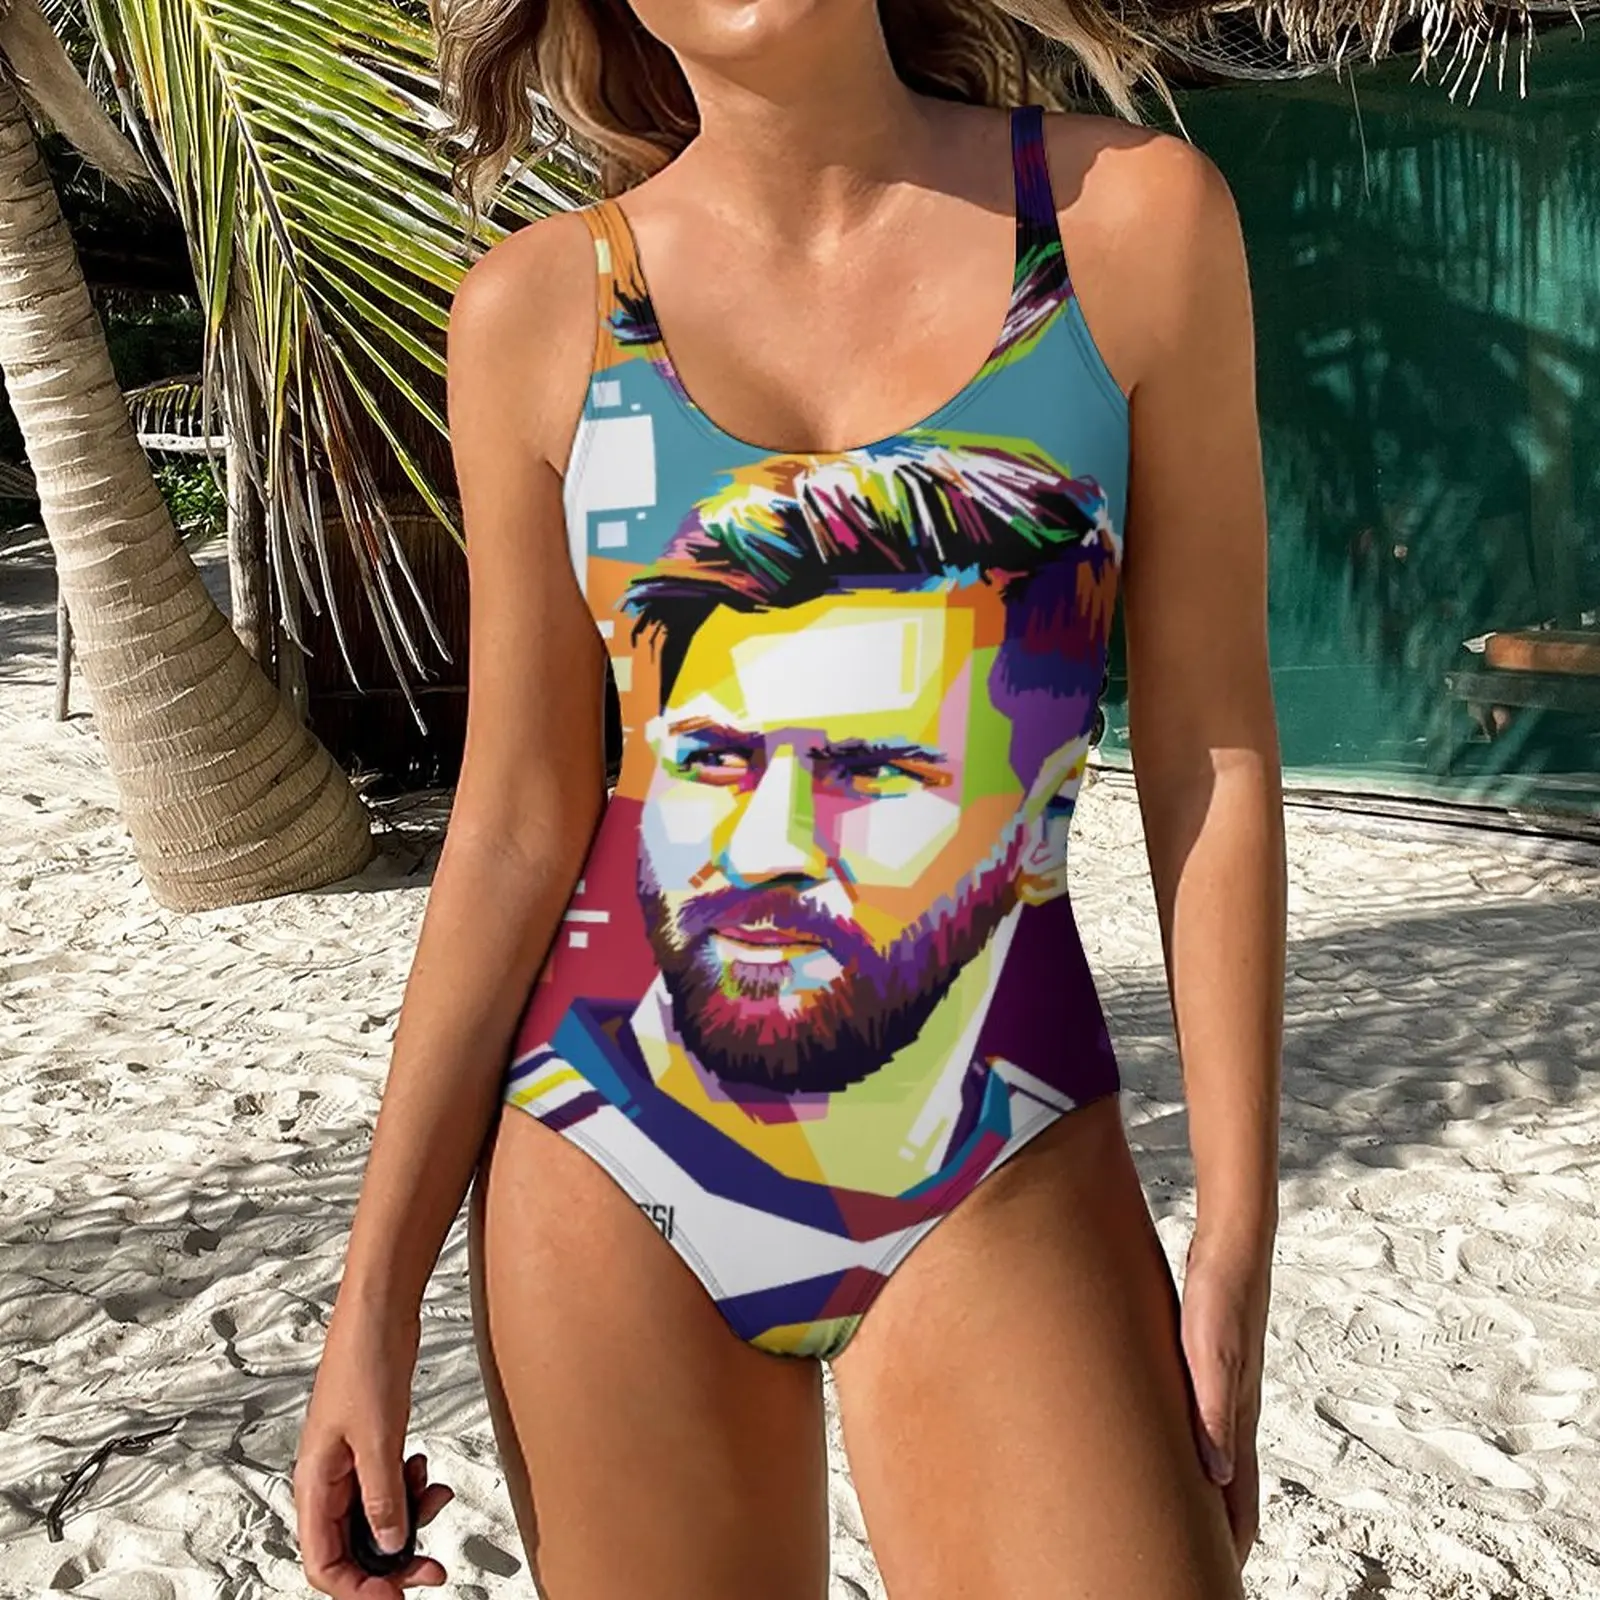 

One-piece Swimsuit Argentina Lioneler And Messi (10) Funny Exotic Women's Bikinis Humor Graphic High Grade Swimsuit Beachwear